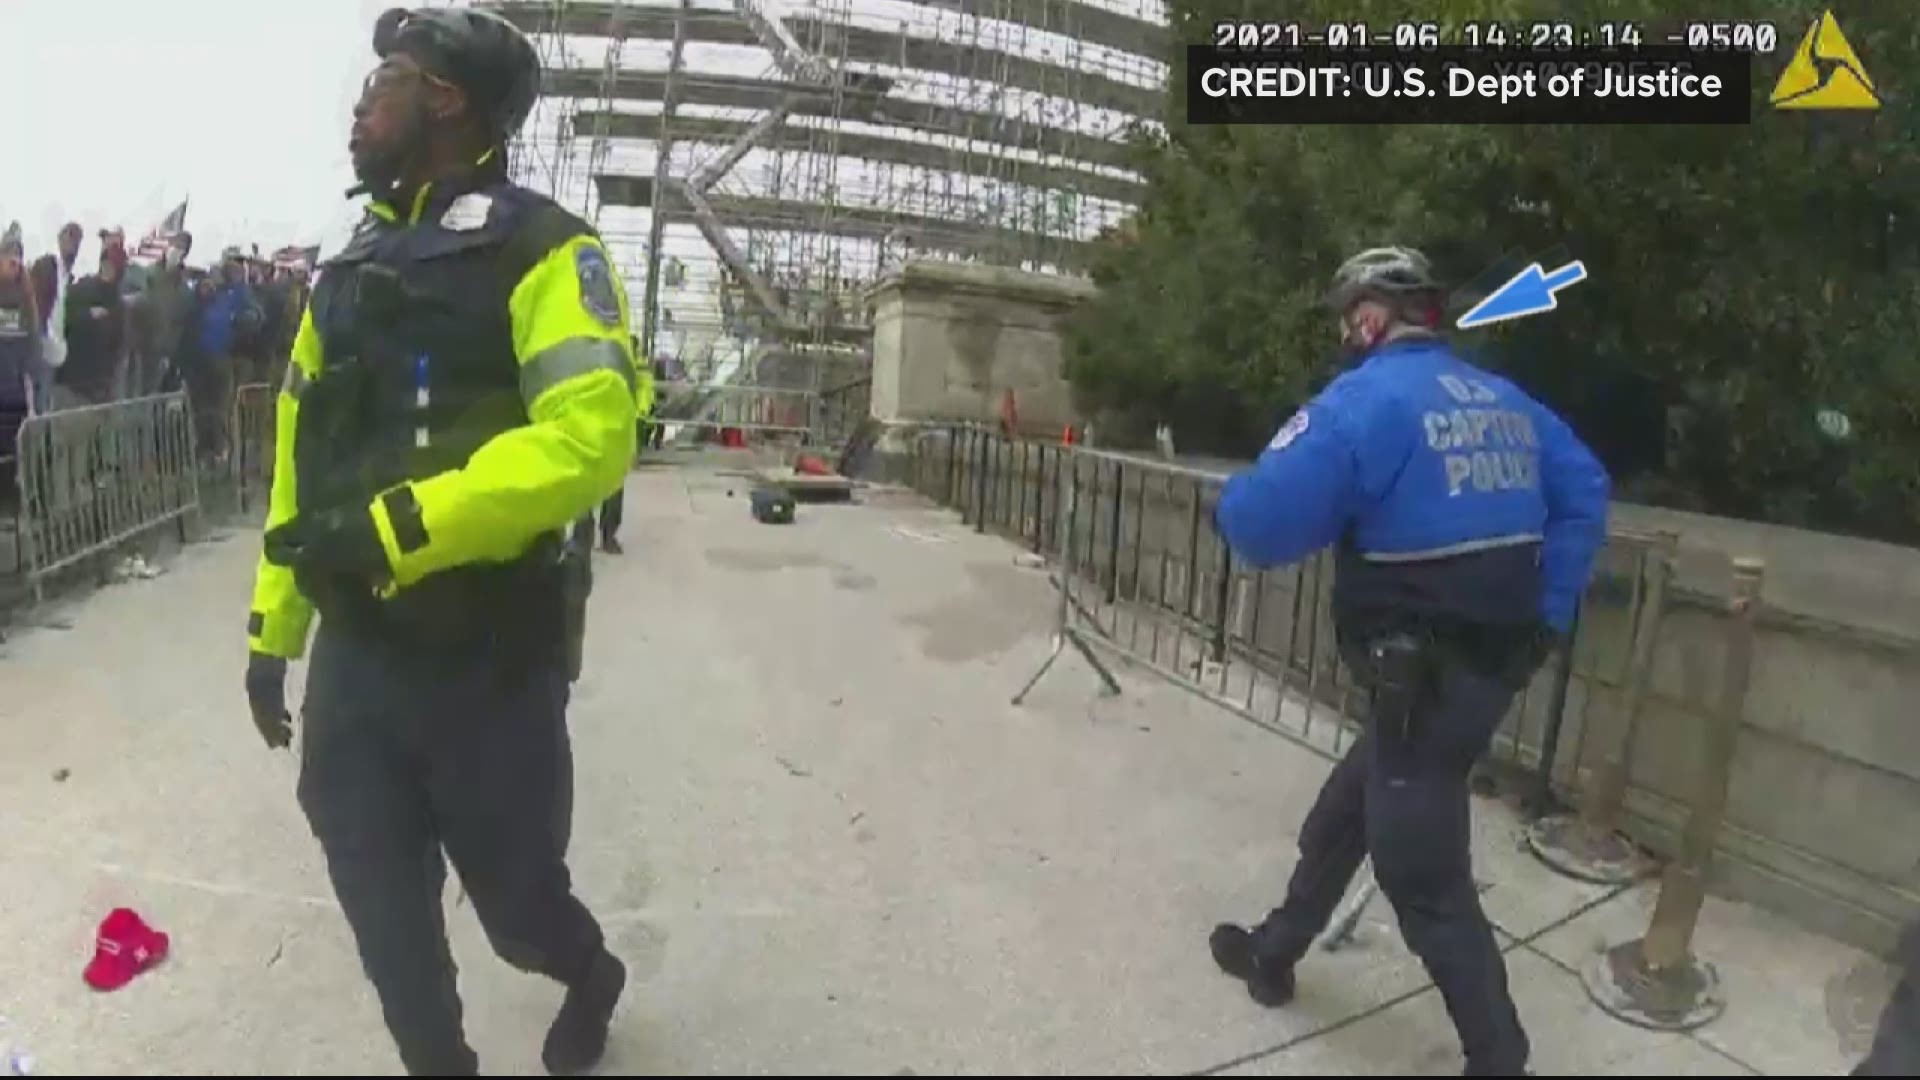 The Department of Justice releases never-before-seen video from the January 6 siege on the U.S. Capitol